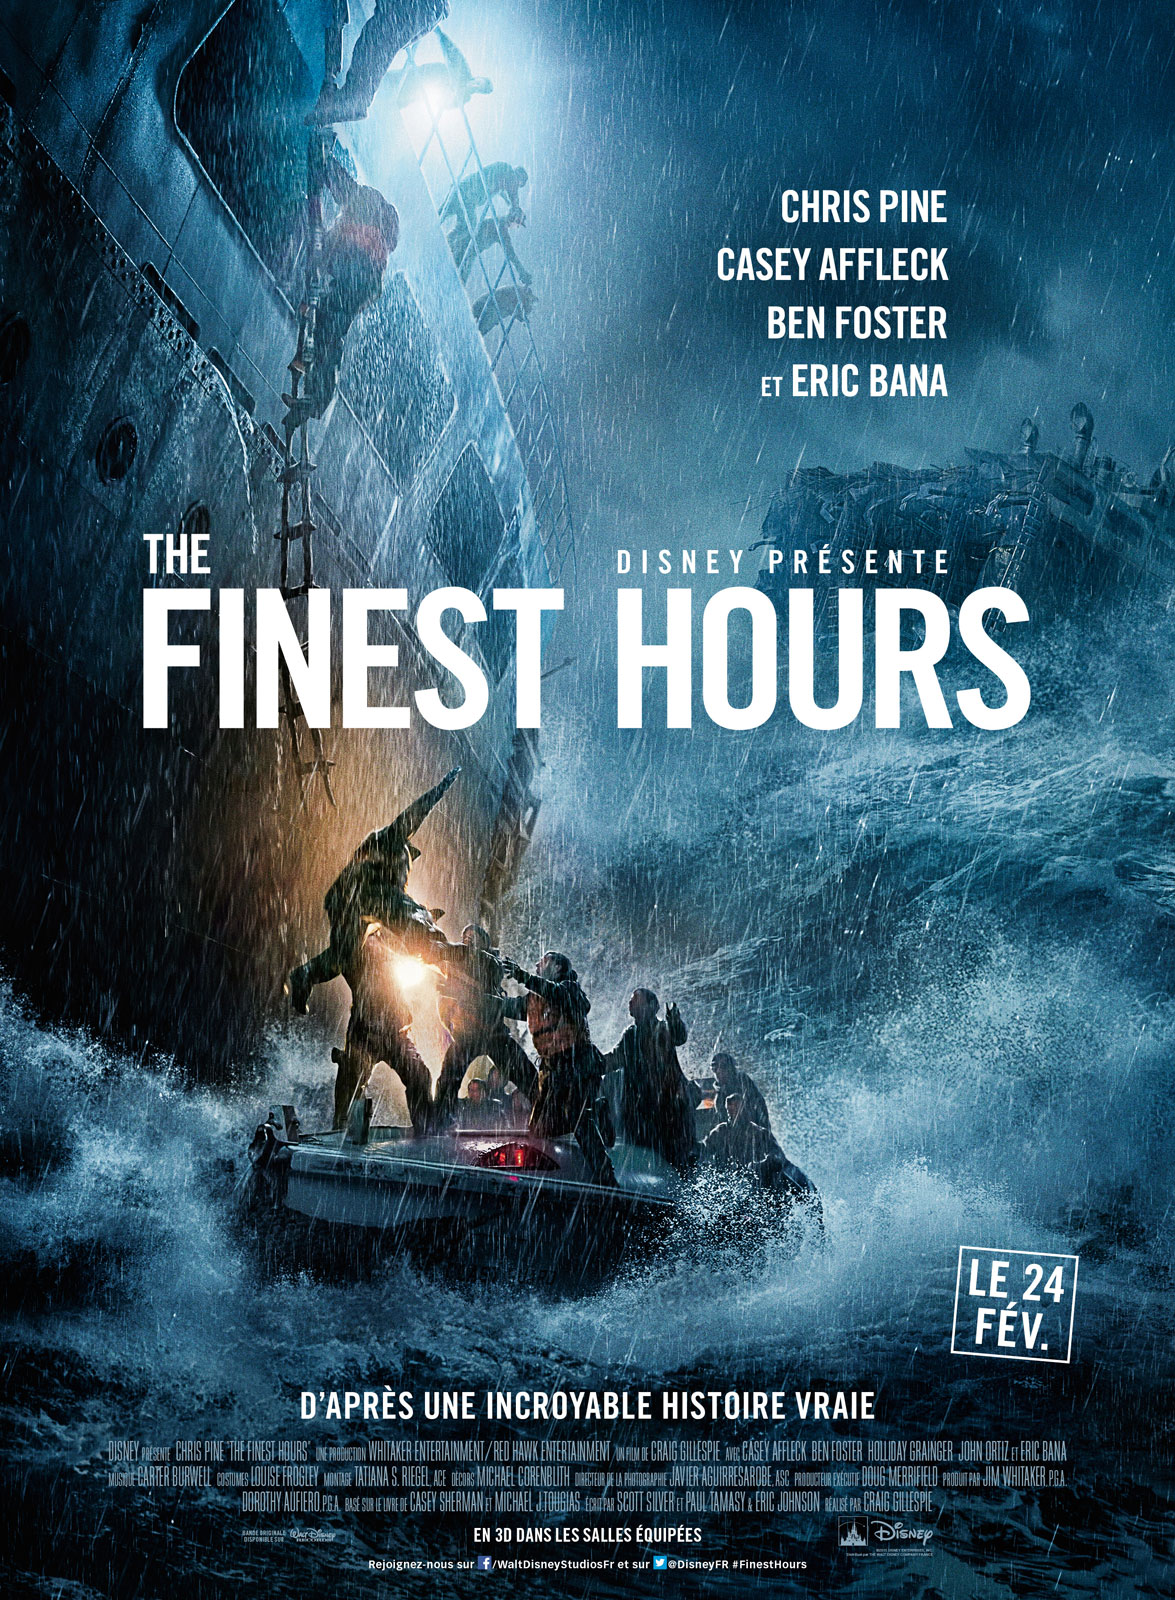 The Finest Hours streaming vf gratuit